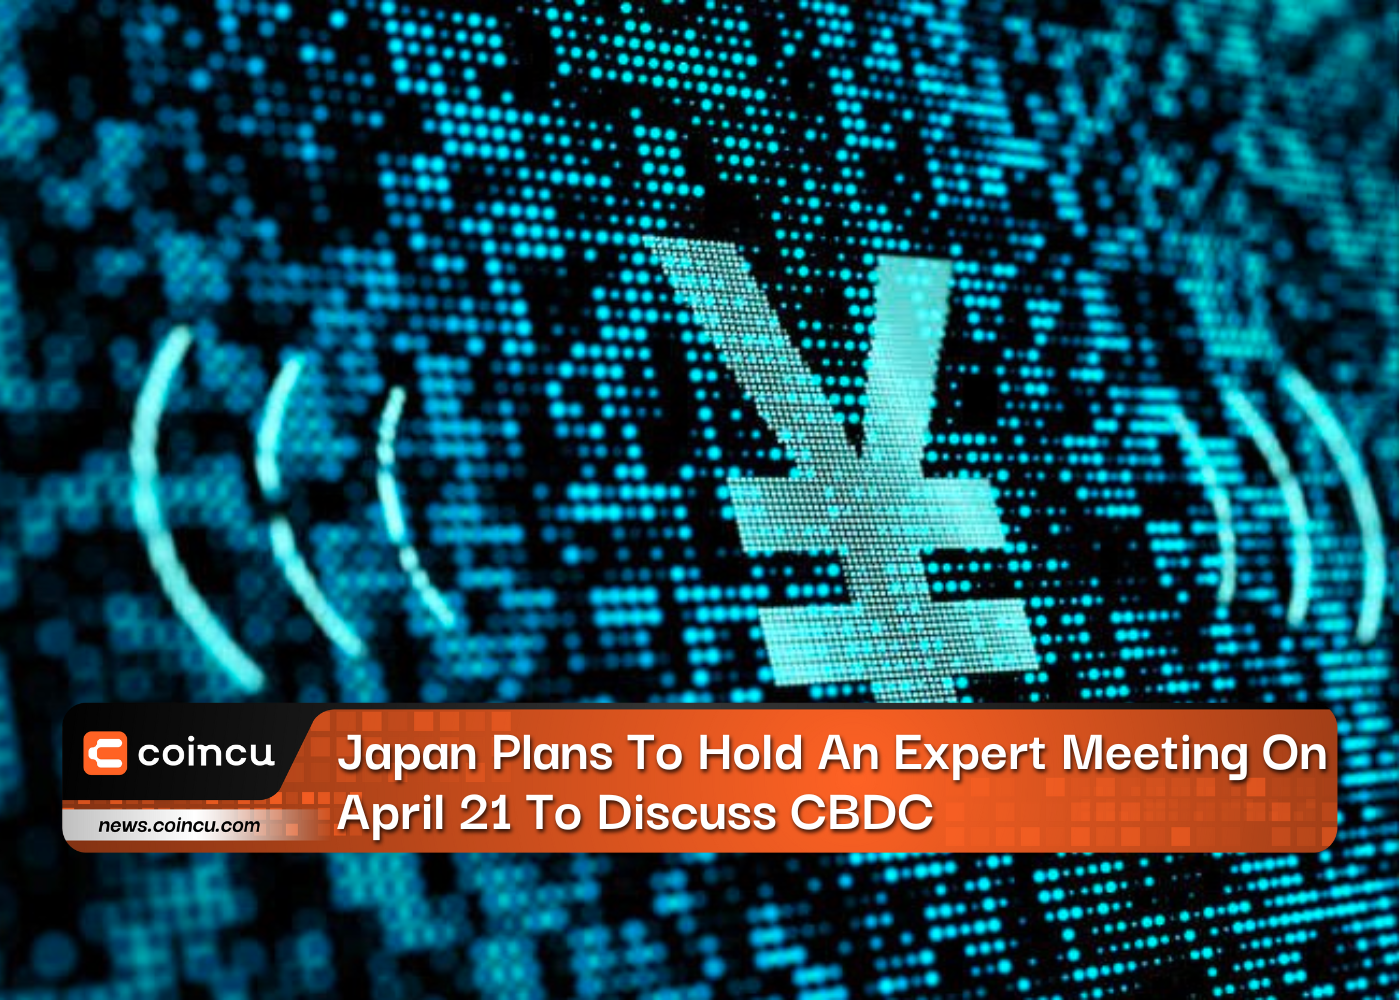 Japan Plans To Hold An Expert Meeting On April 21 To Discuss CBDC